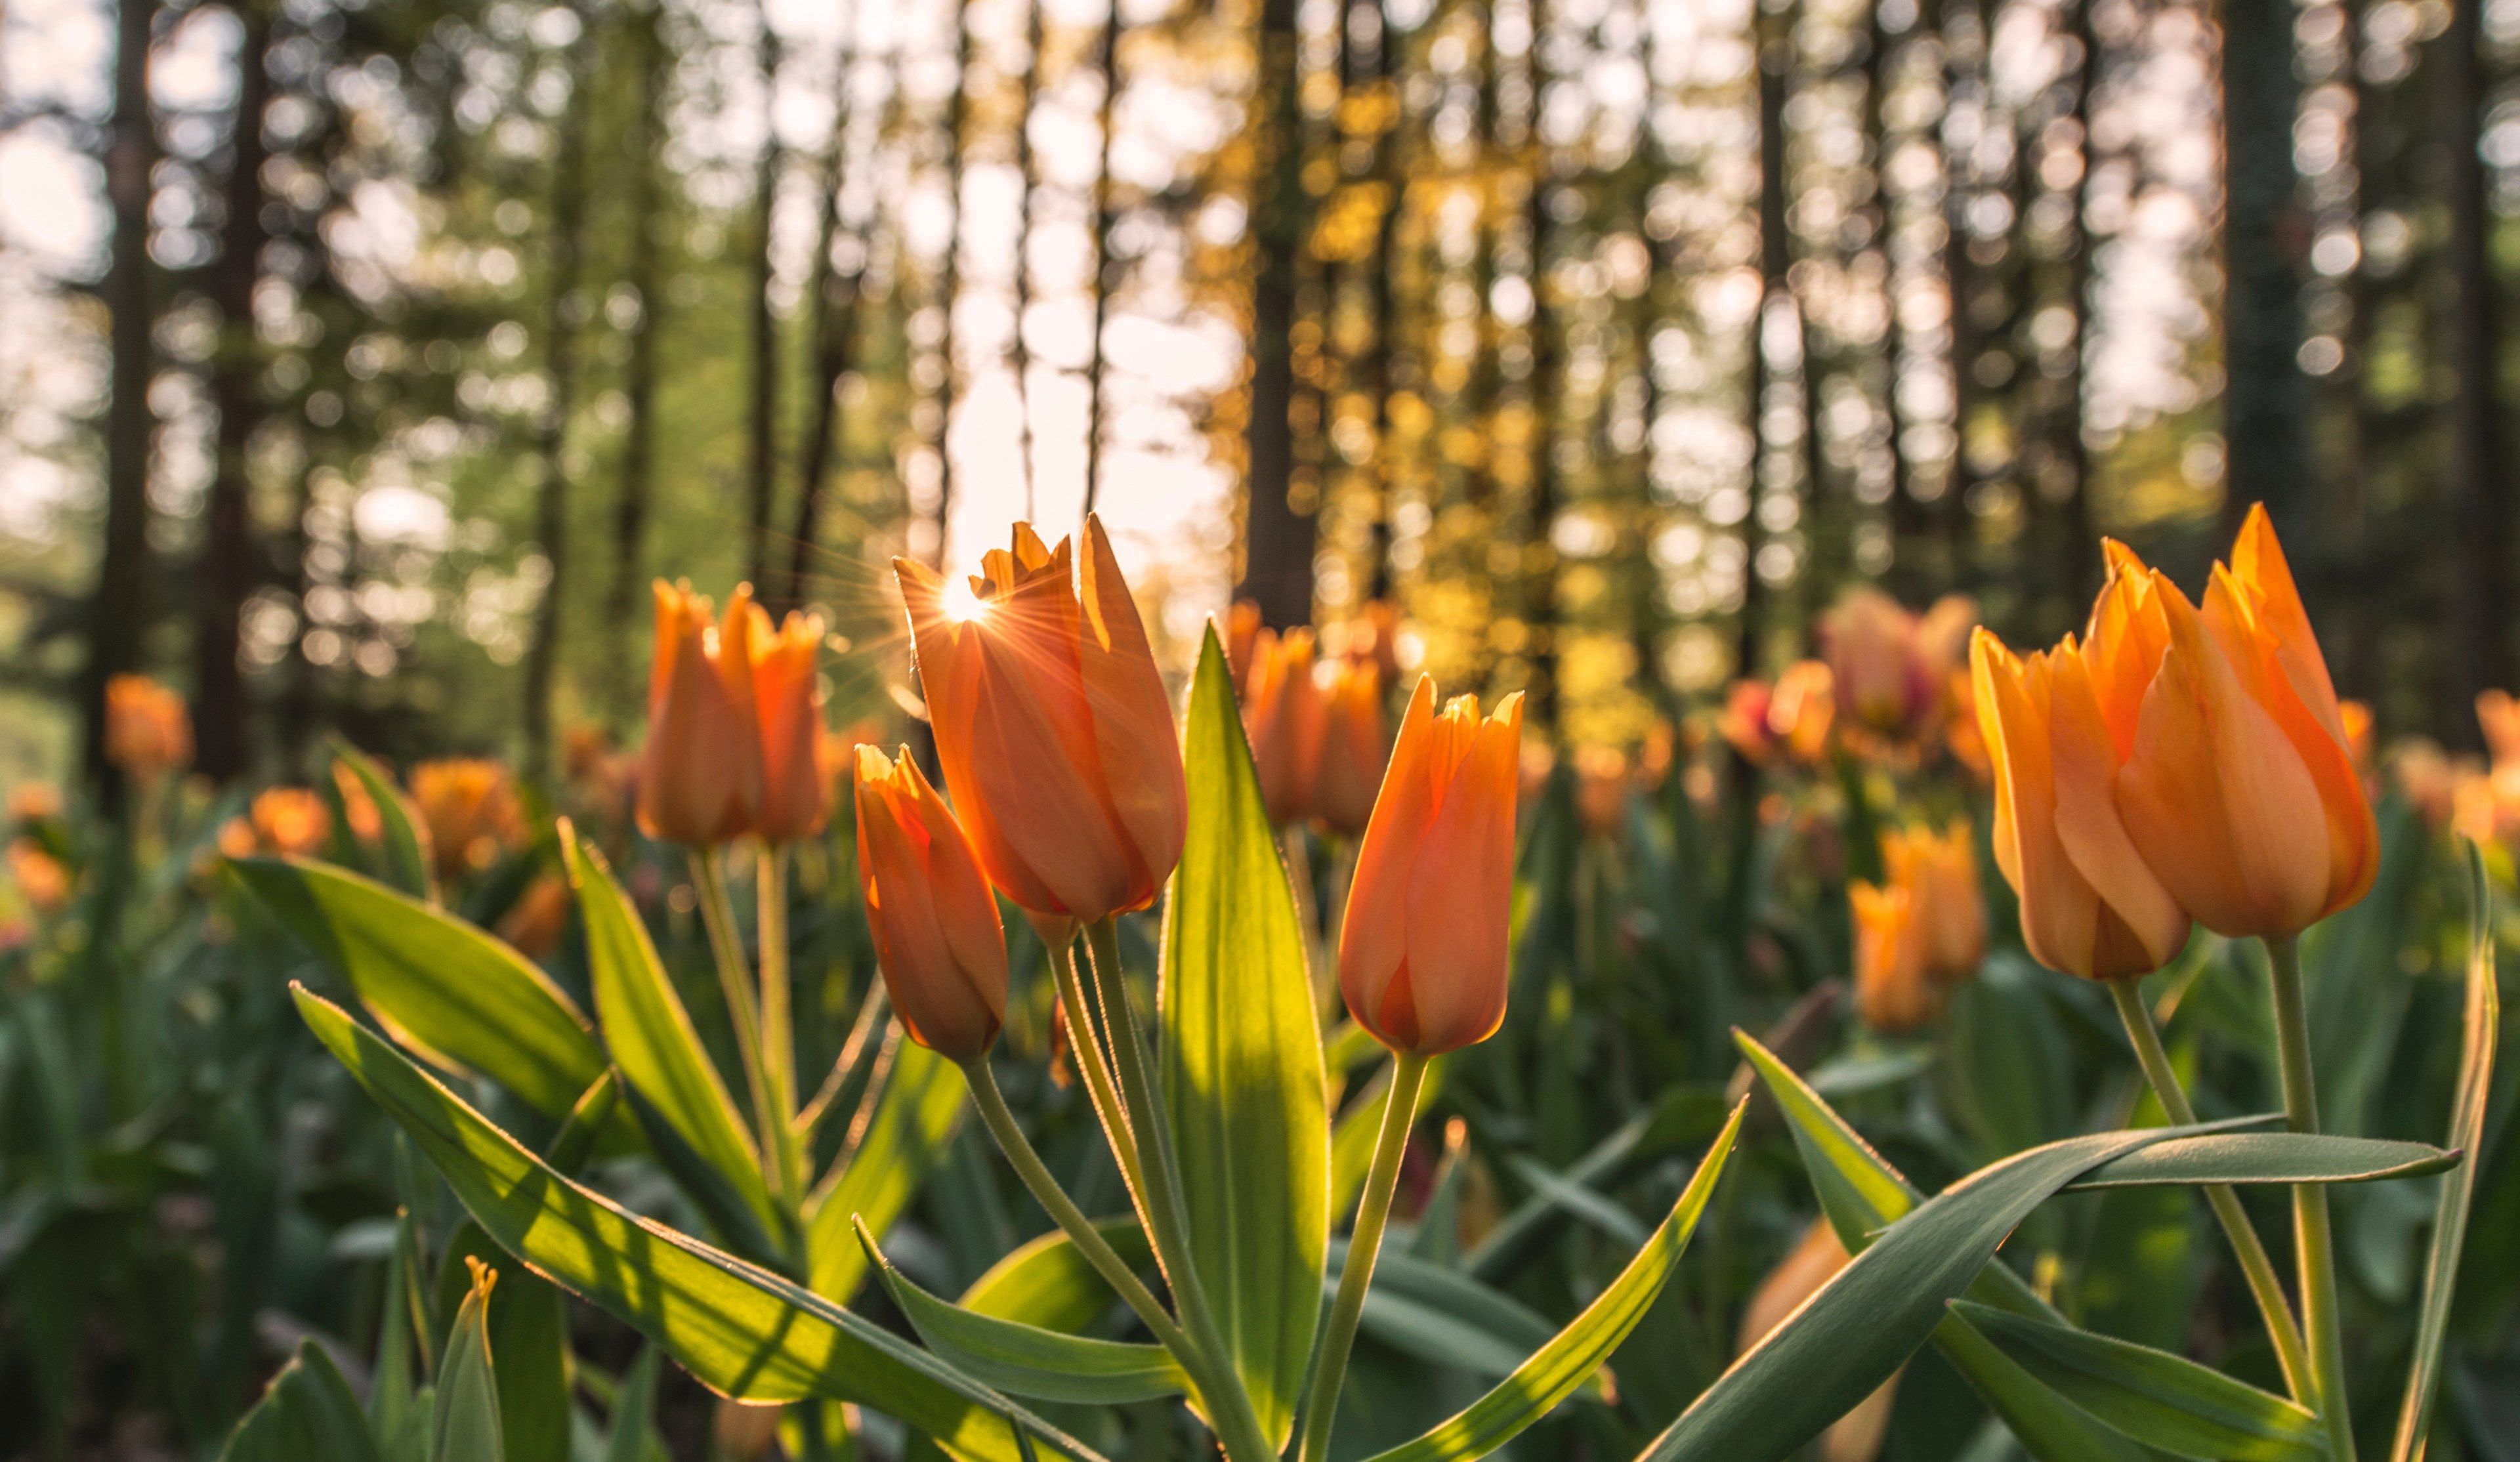 sunset shot of orange tulip flowers in nature in forest